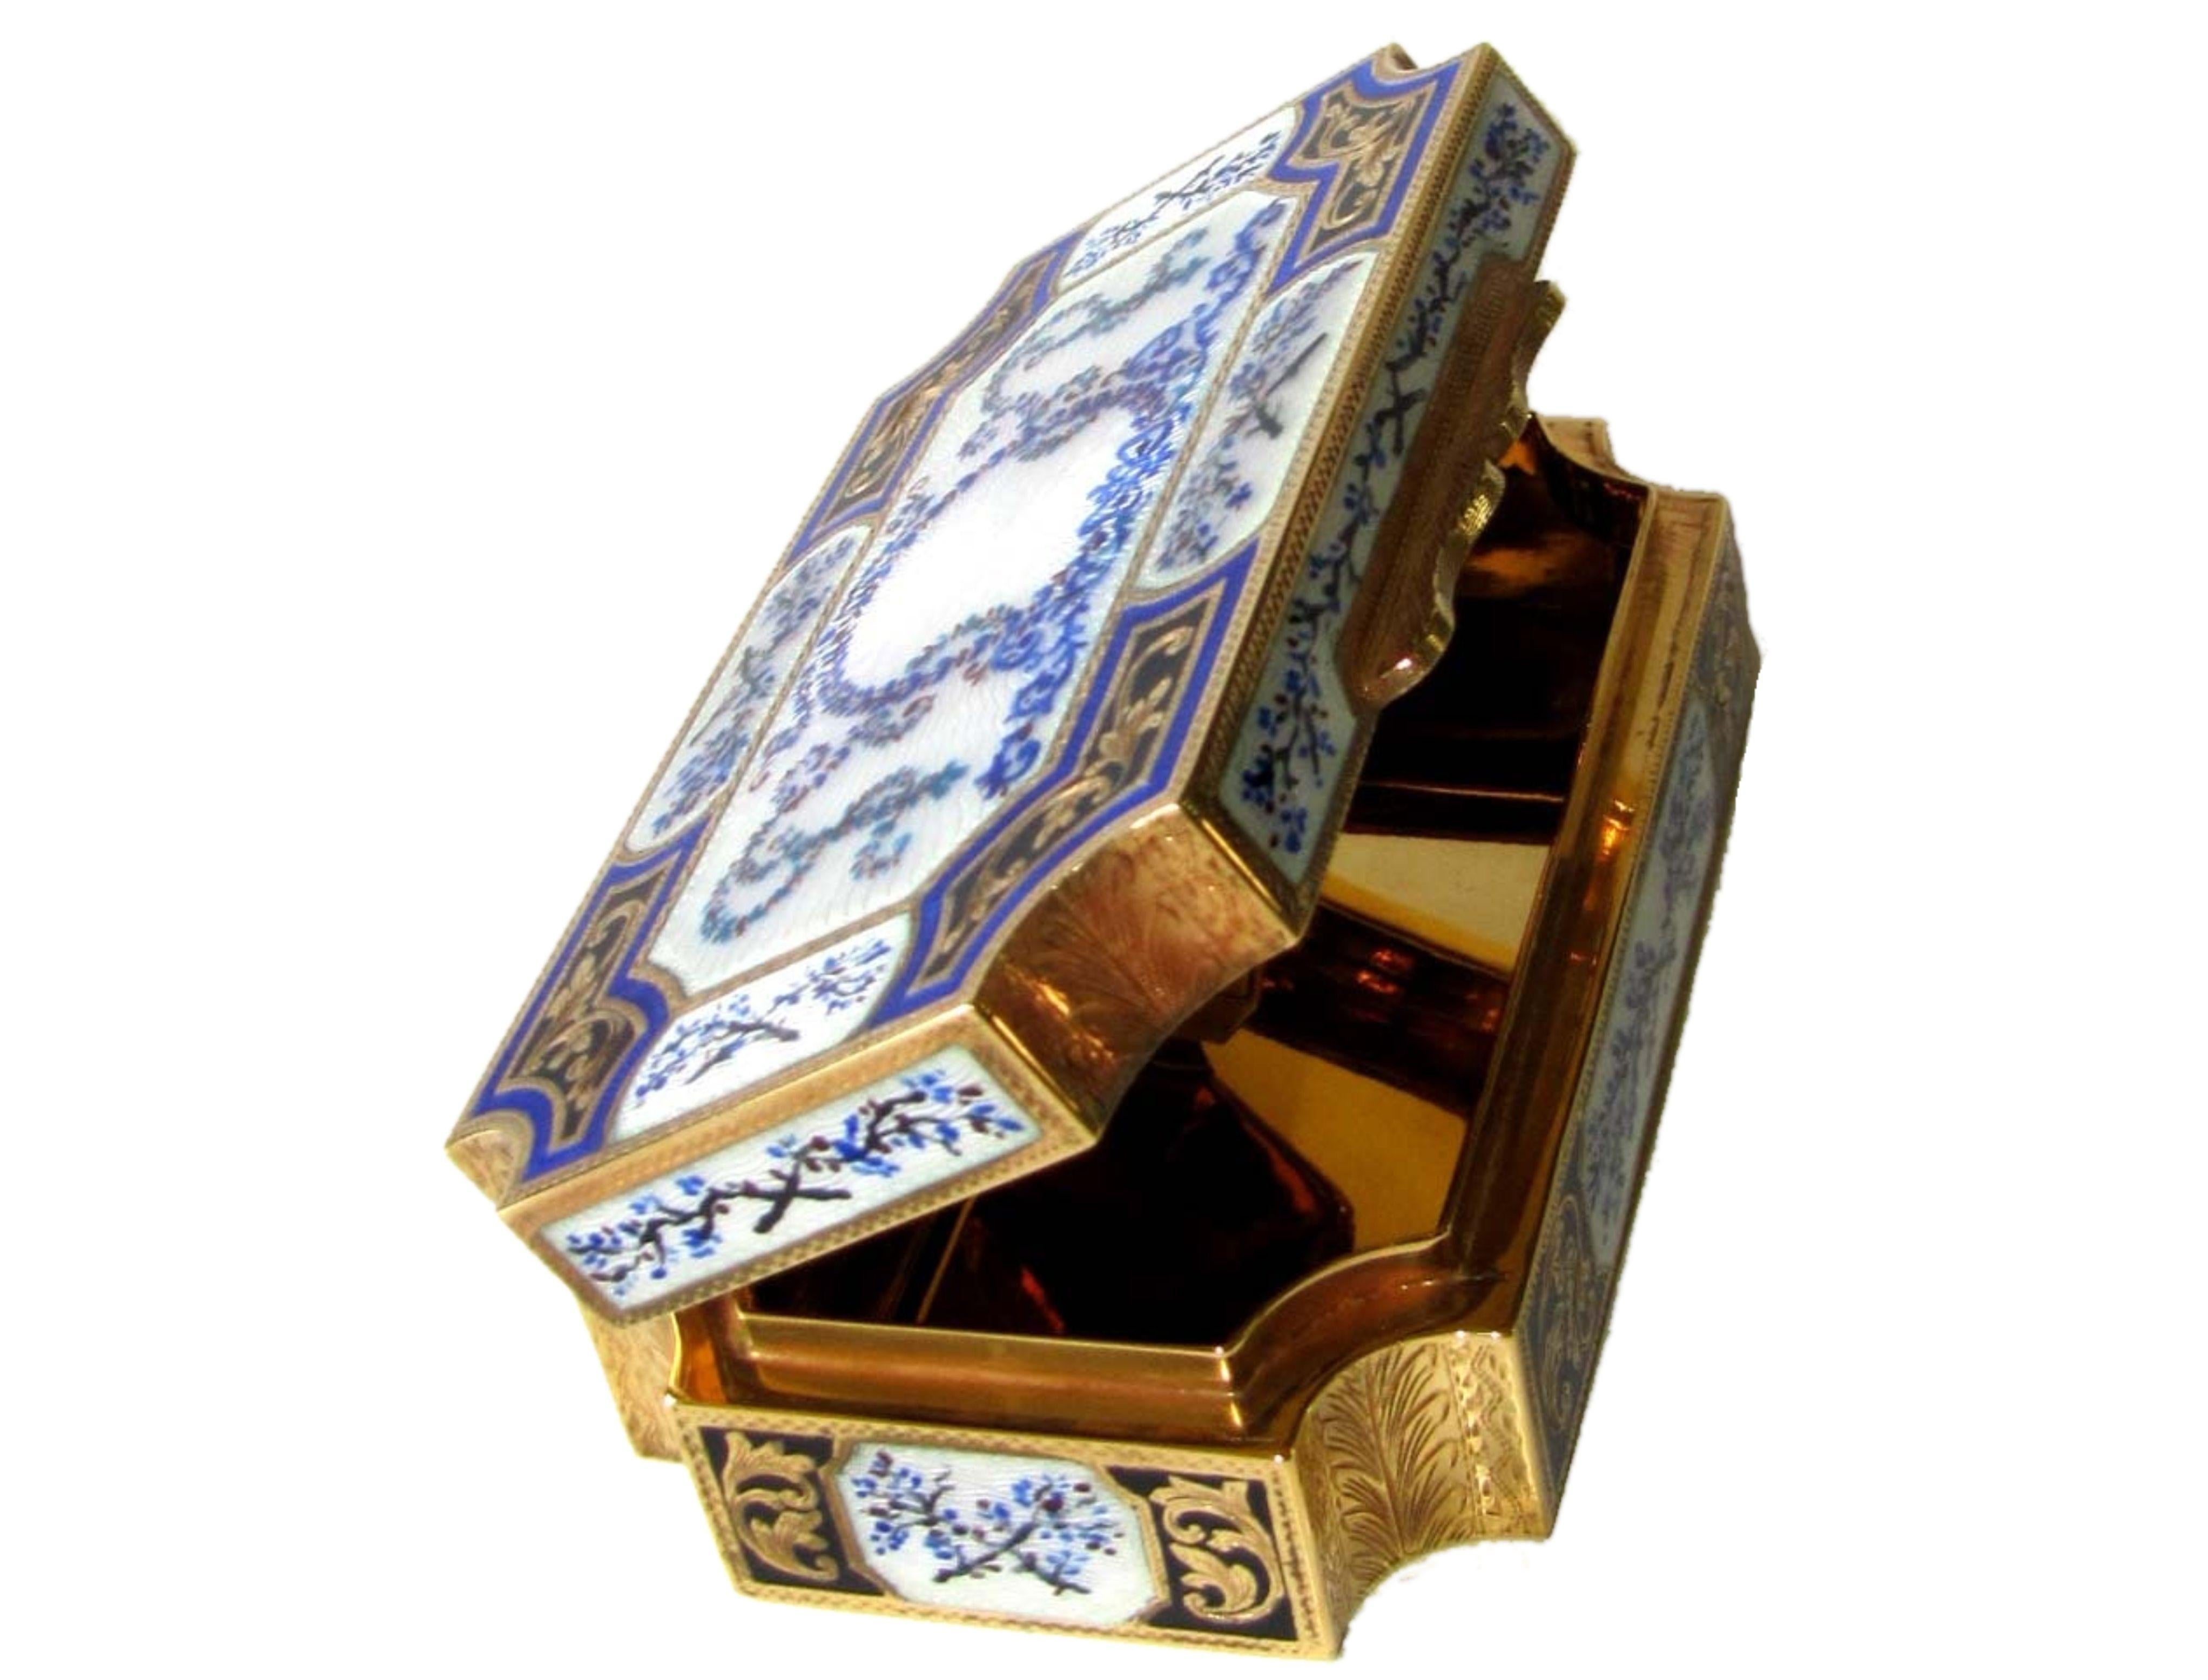 Empire Sterling Silver Jewel Box Fire Enamel Guilloché Hand Painted, Engraved Salimbeni